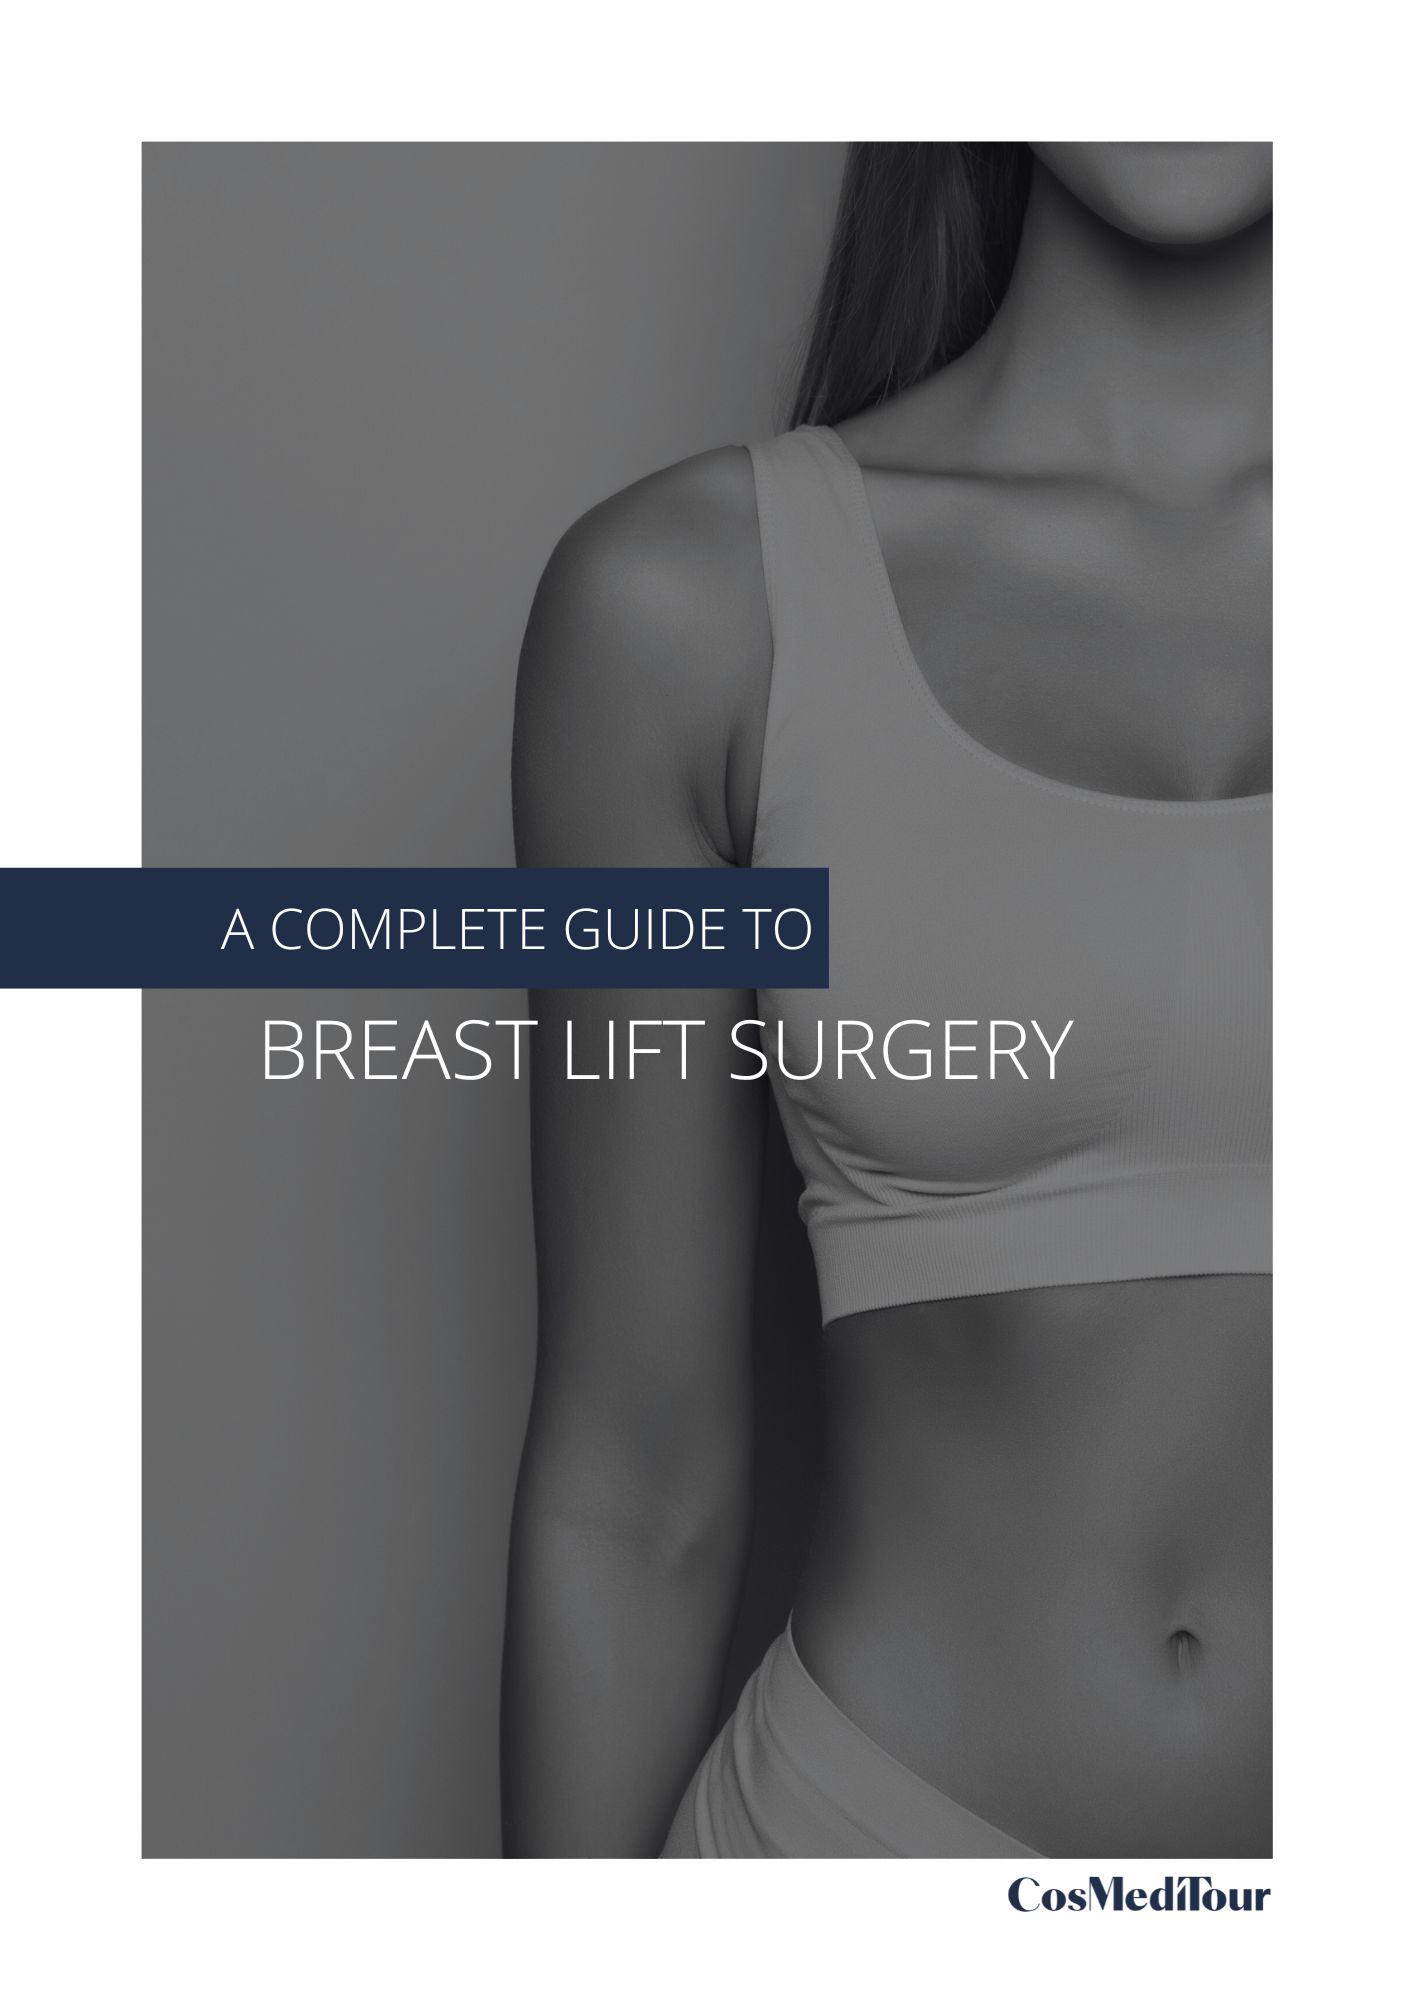 Your Guide to Breast Lifts